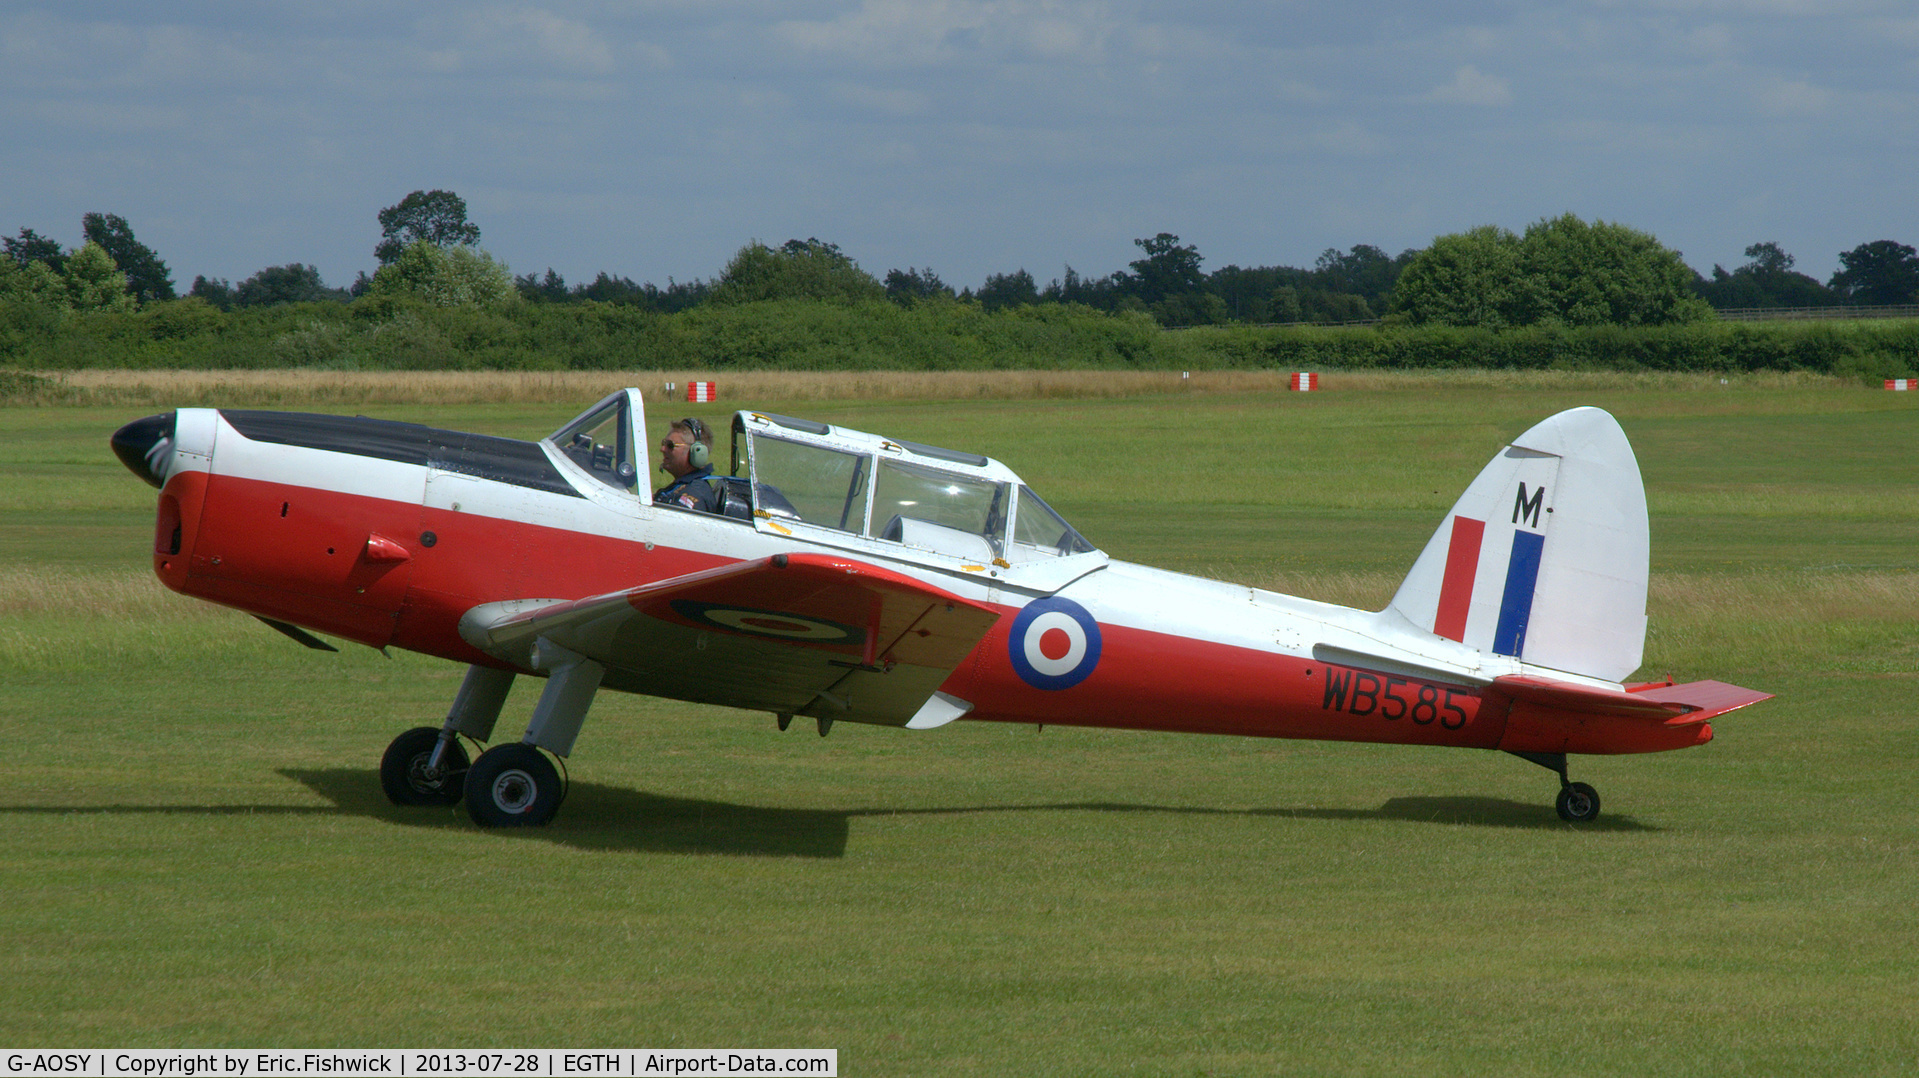 G-AOSY, 1950 De Havilland DHC-1 Chipmunk T.10 C/N C1/0037, 1. WB585 (member of The Red Sparrows) at The Shuttleworth Collection Wings & Wheels Flying Day, July 2013.